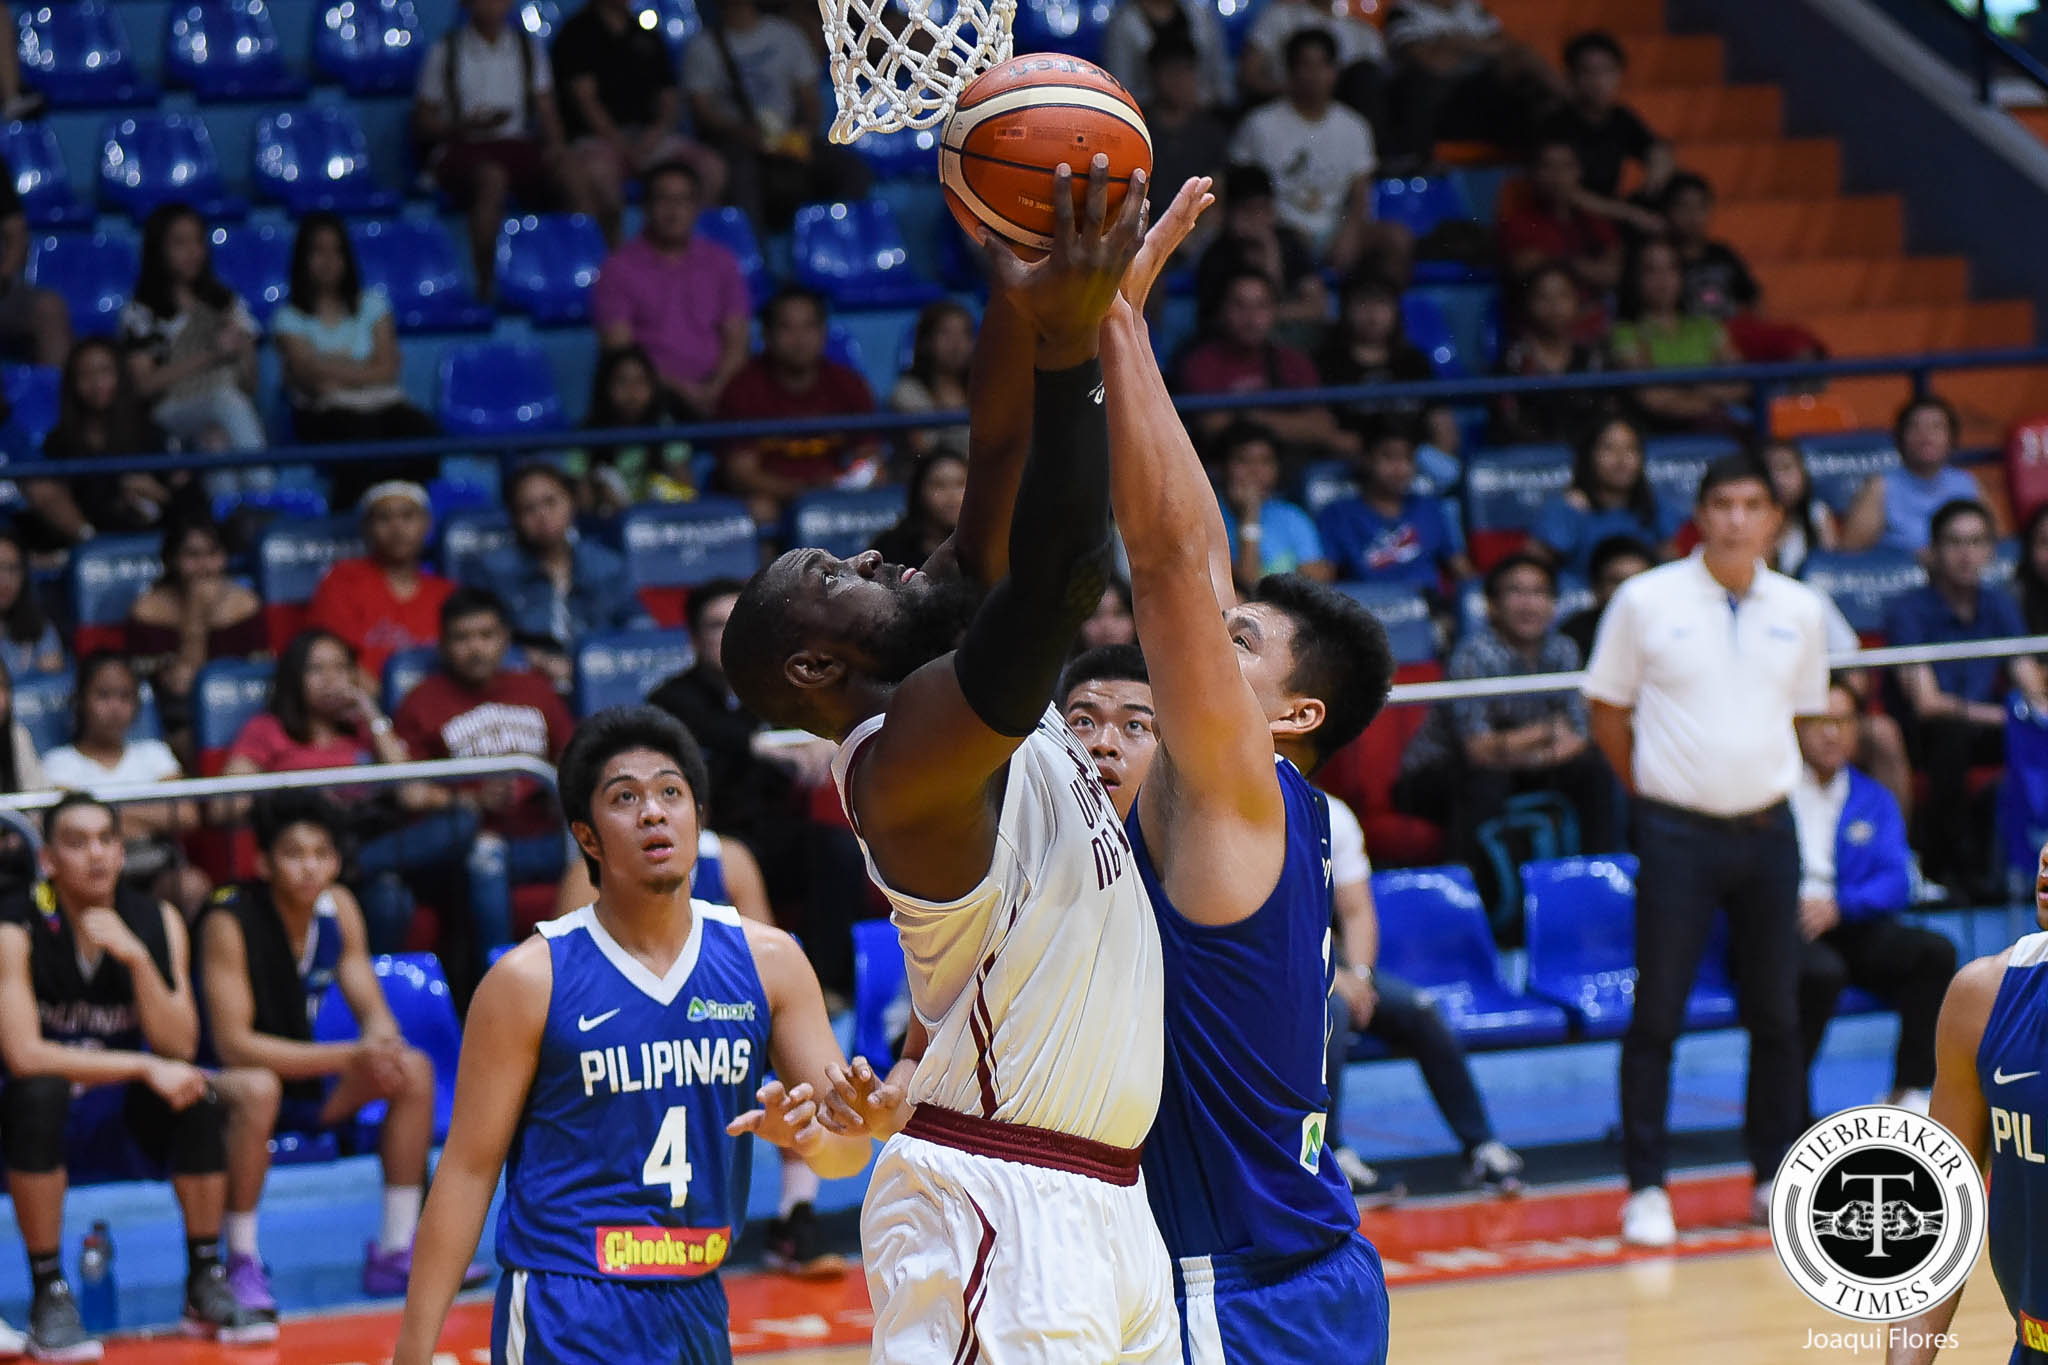 Filoil-2018-Gilas-Cadets-vs.-UP-Akhuetie-6810 Jong Uichico not worried about Cadets' record: 'It's not the purpose' Basketball Gilas Pilipinas News  - philippine sports news